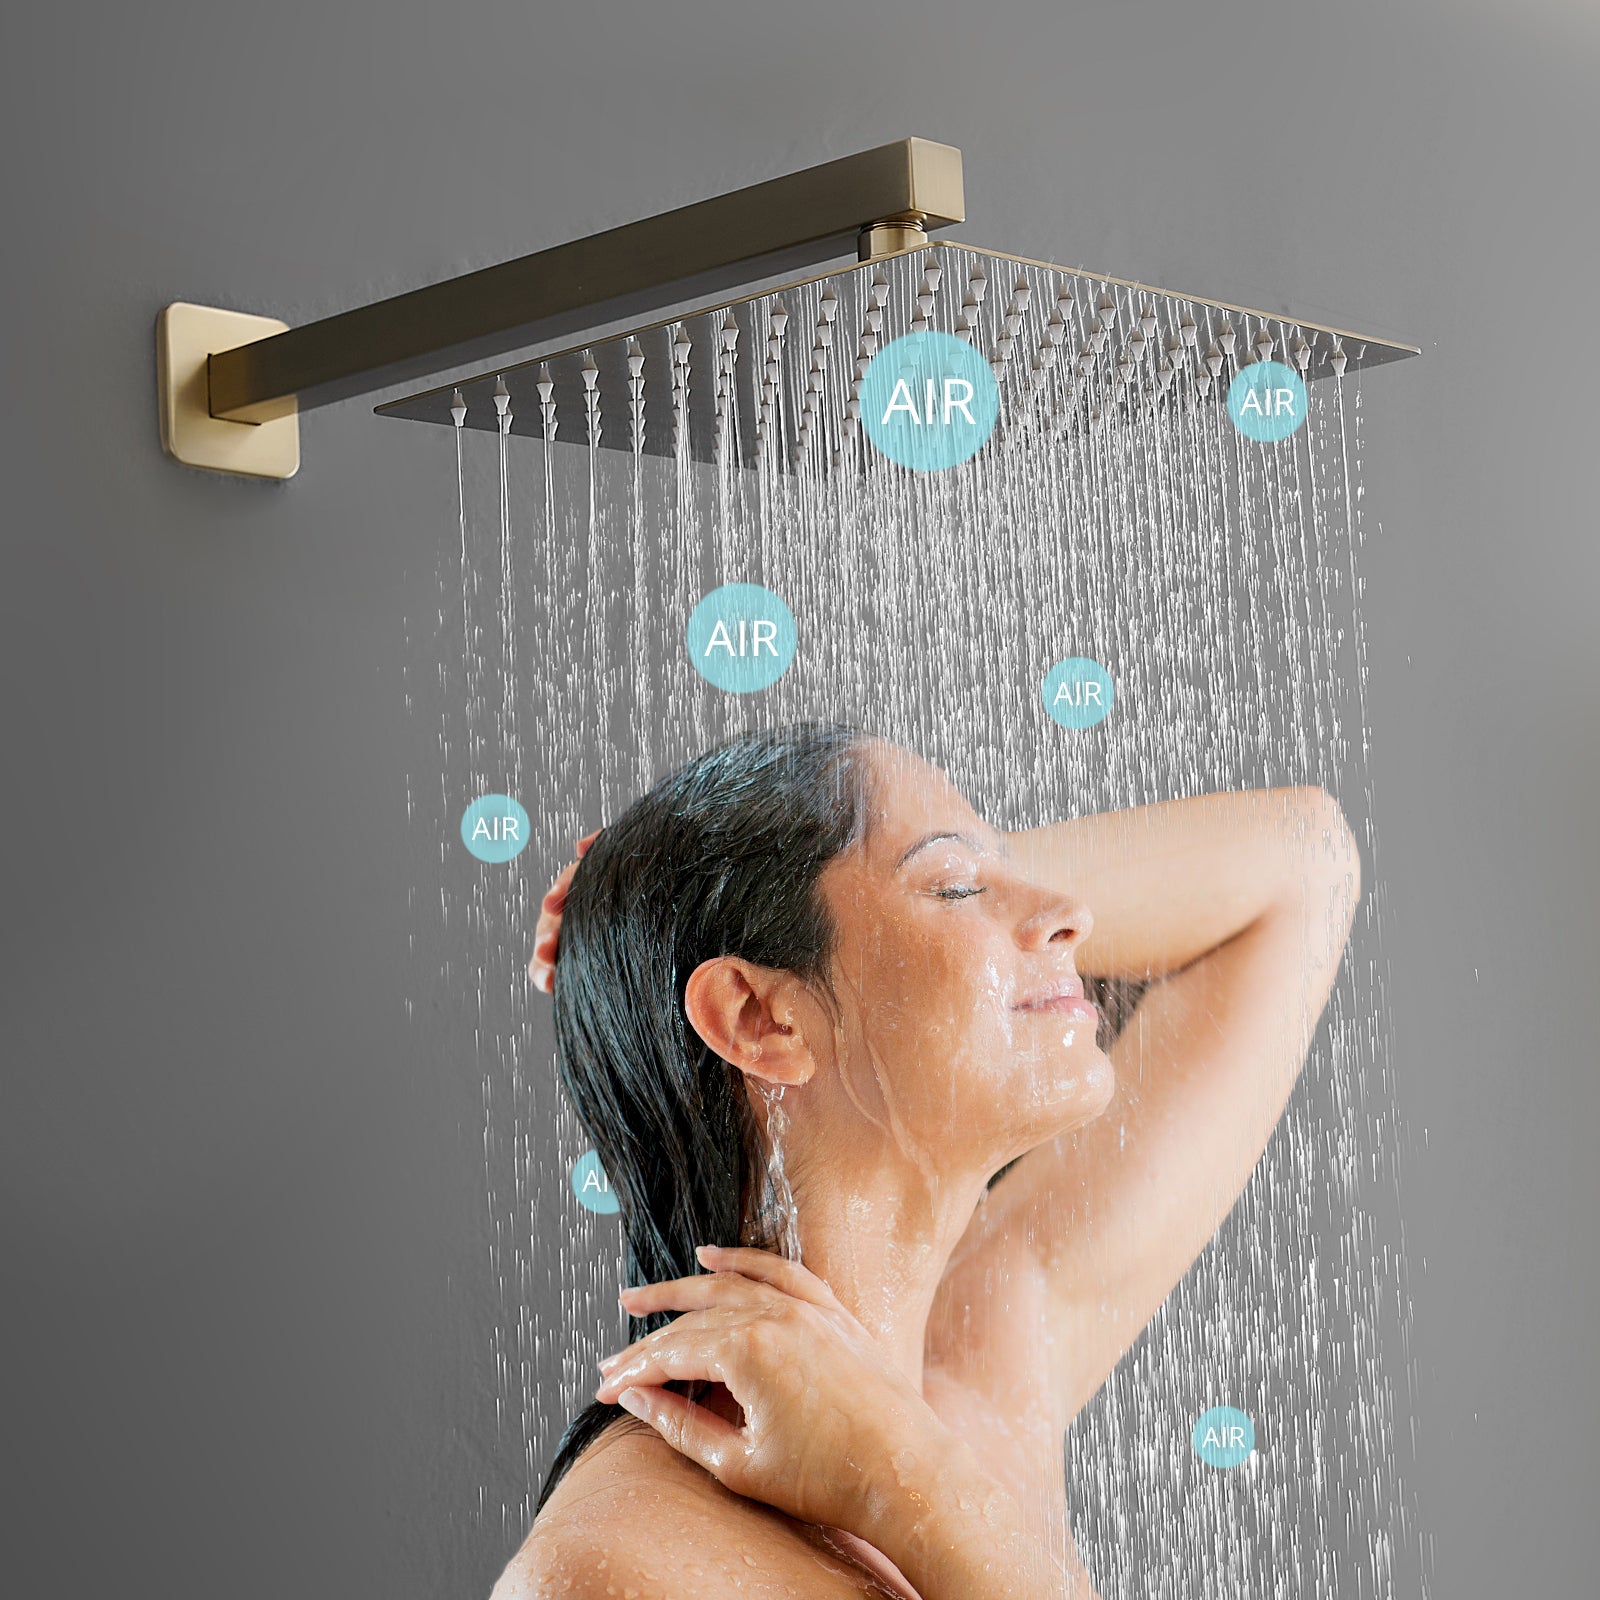 Brushed Gold Luxury Rain Mixer Shower Combo Set Wall Shower Head and Handheld Faucet Set